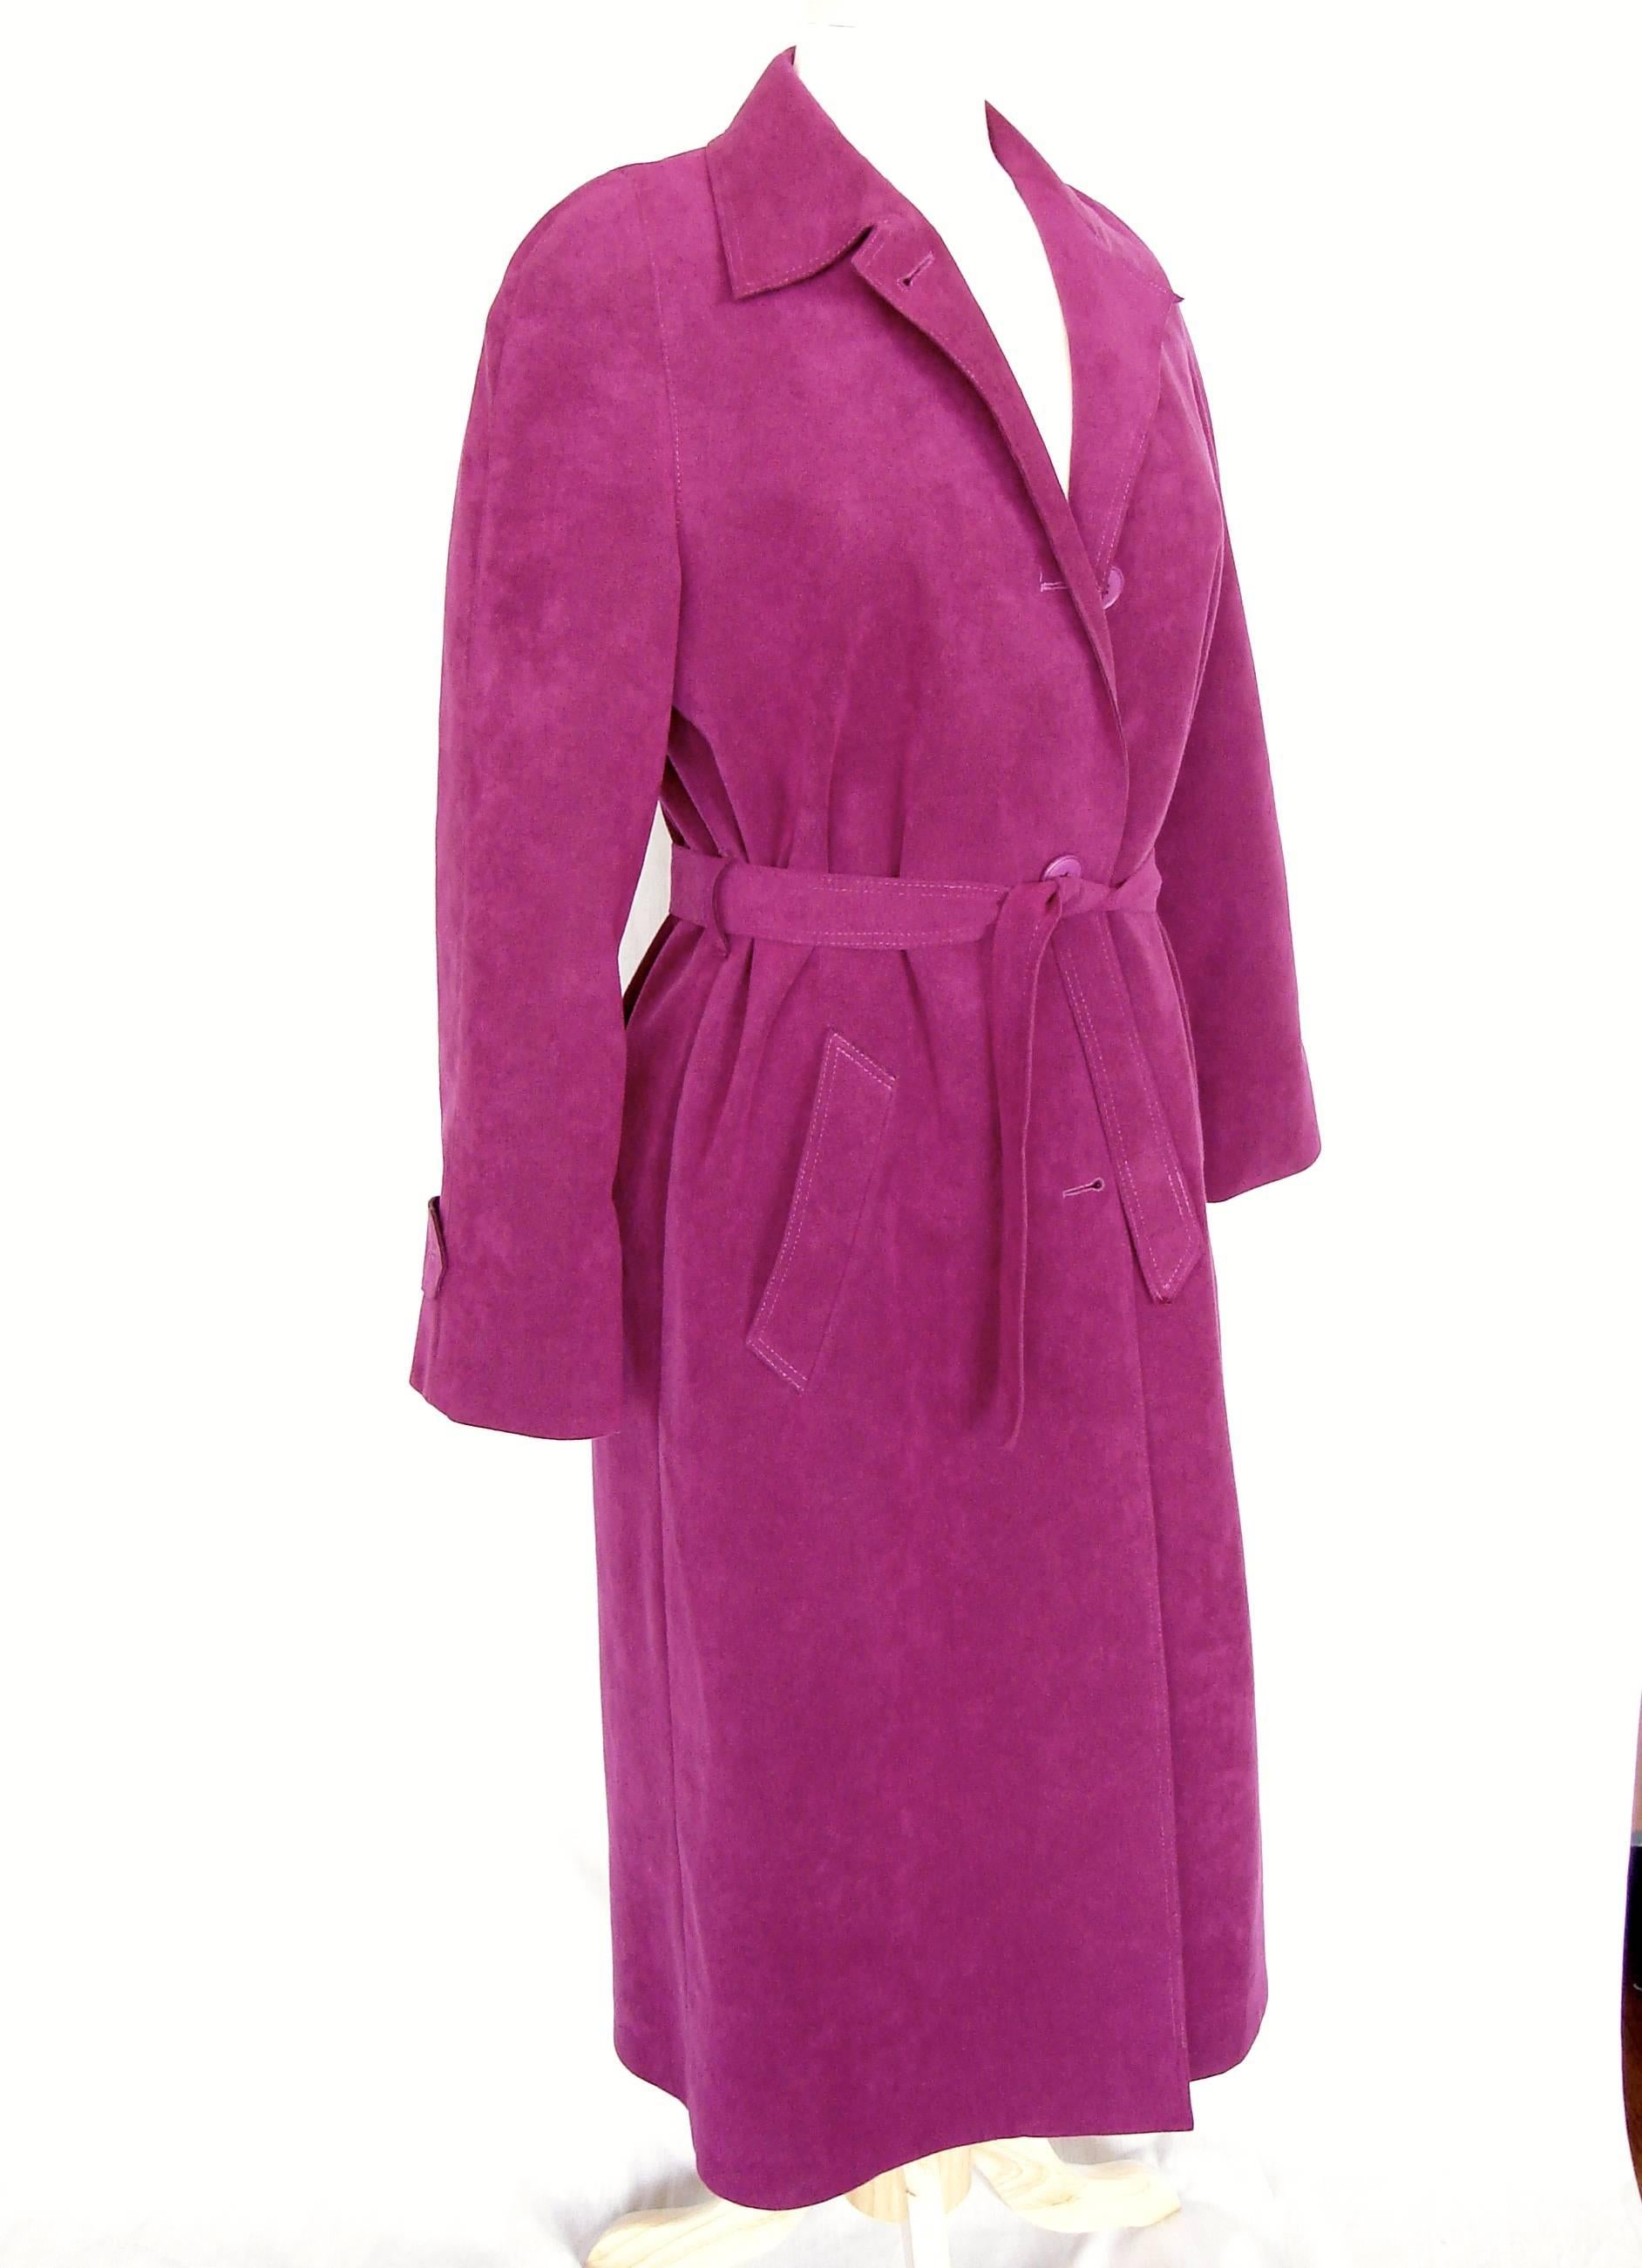 Purple Lilli Ann Vibrant Magenta Ultrasuede Belted Trench Coat Size M 1970s